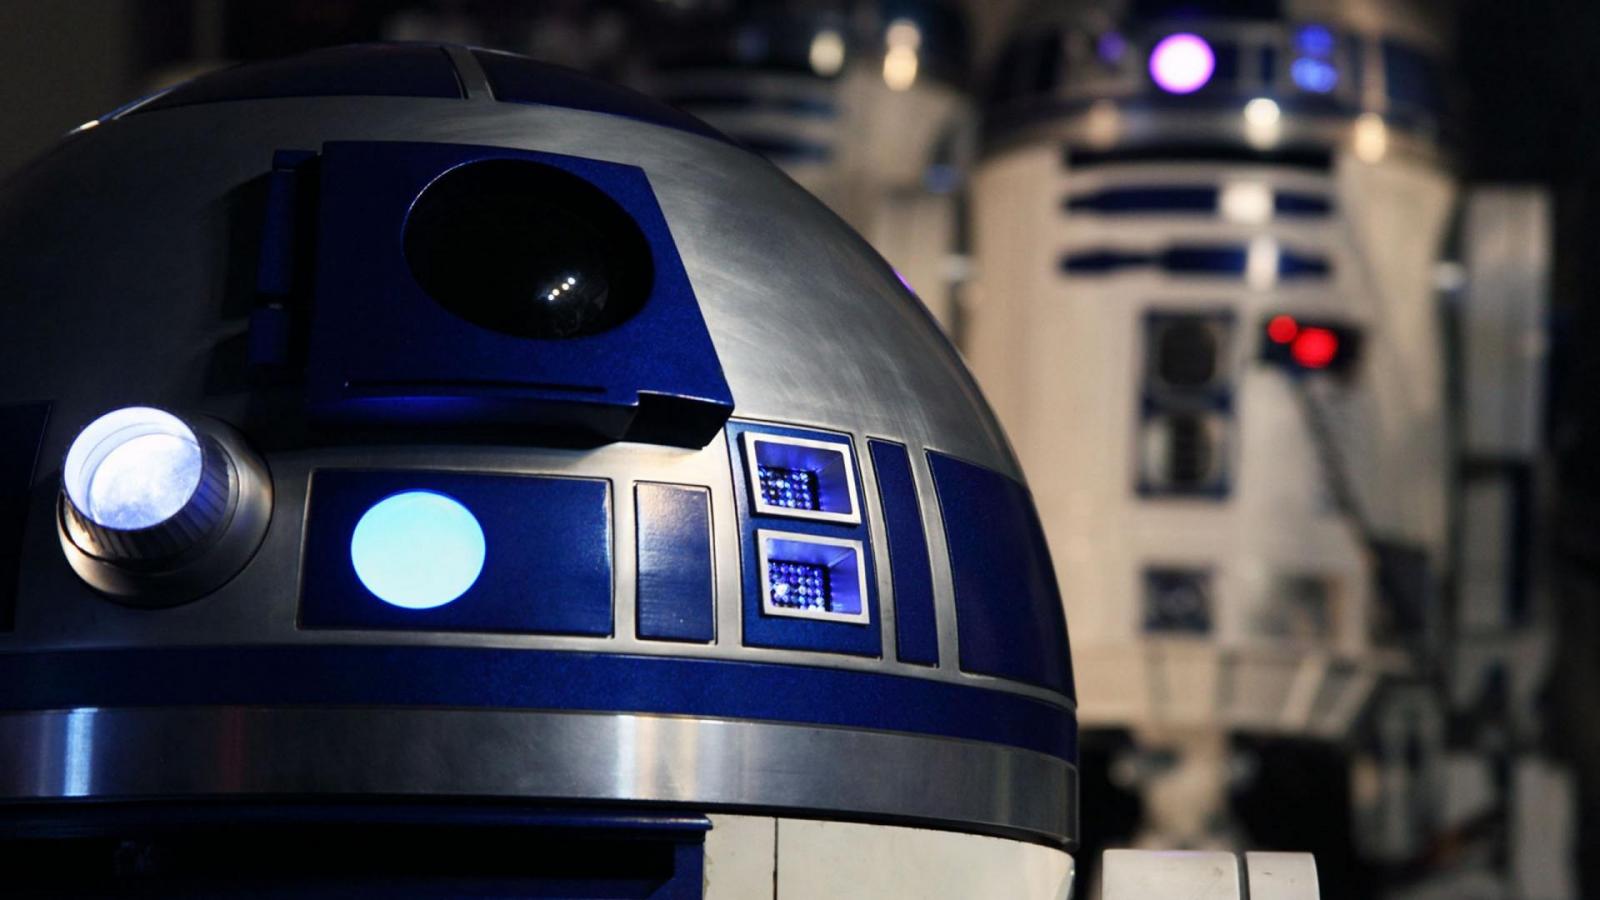 R2d2 Wallpaper High Quality And Resolution On